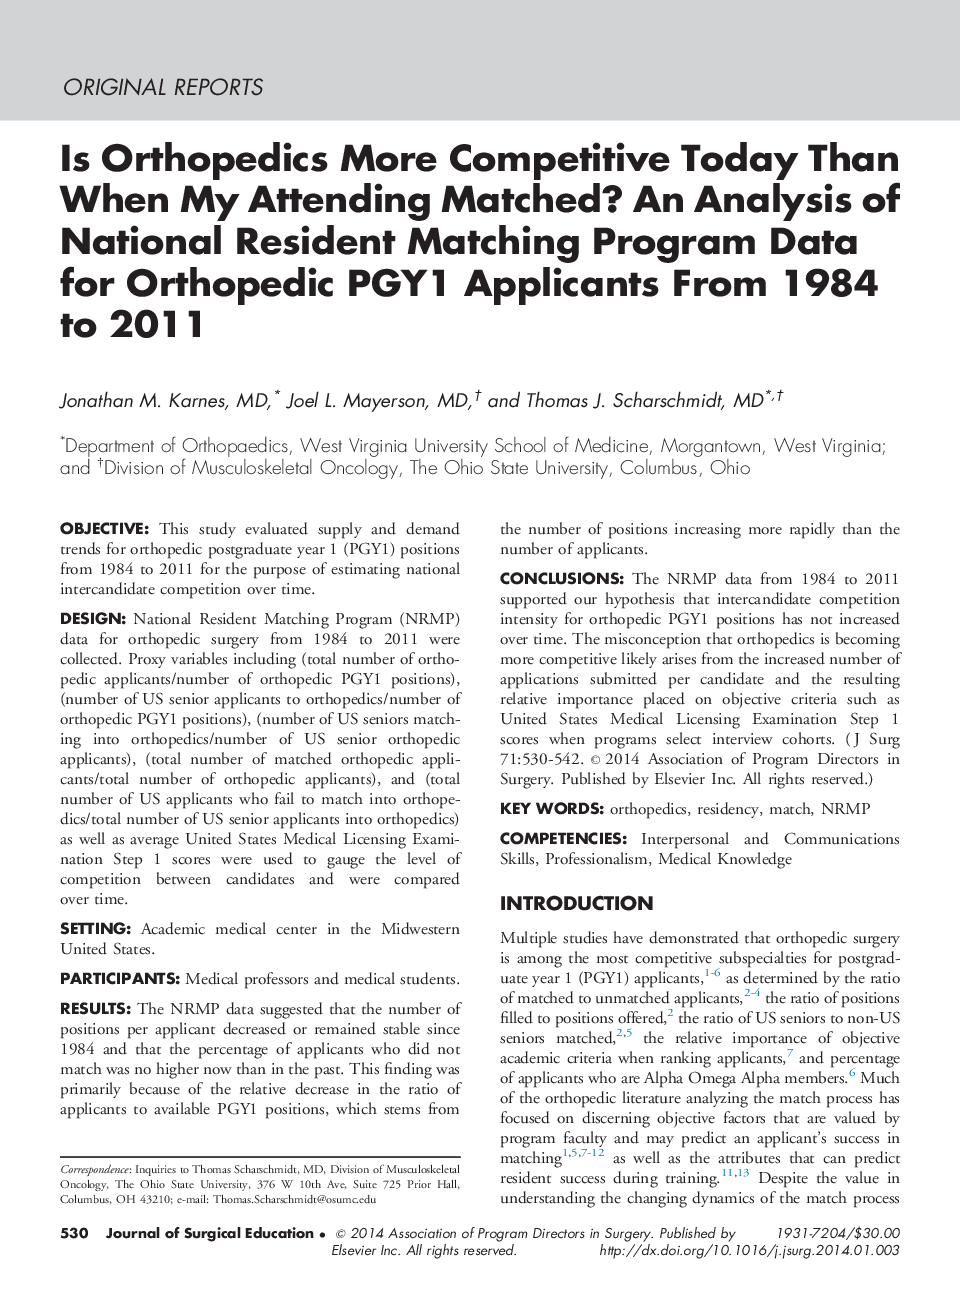 Is Orthopedics More Competitive Today Than When My Attending Matched? An Analysis of National Resident Matching Program Data for Orthopedic PGY1 Applicants From 1984 to 2011